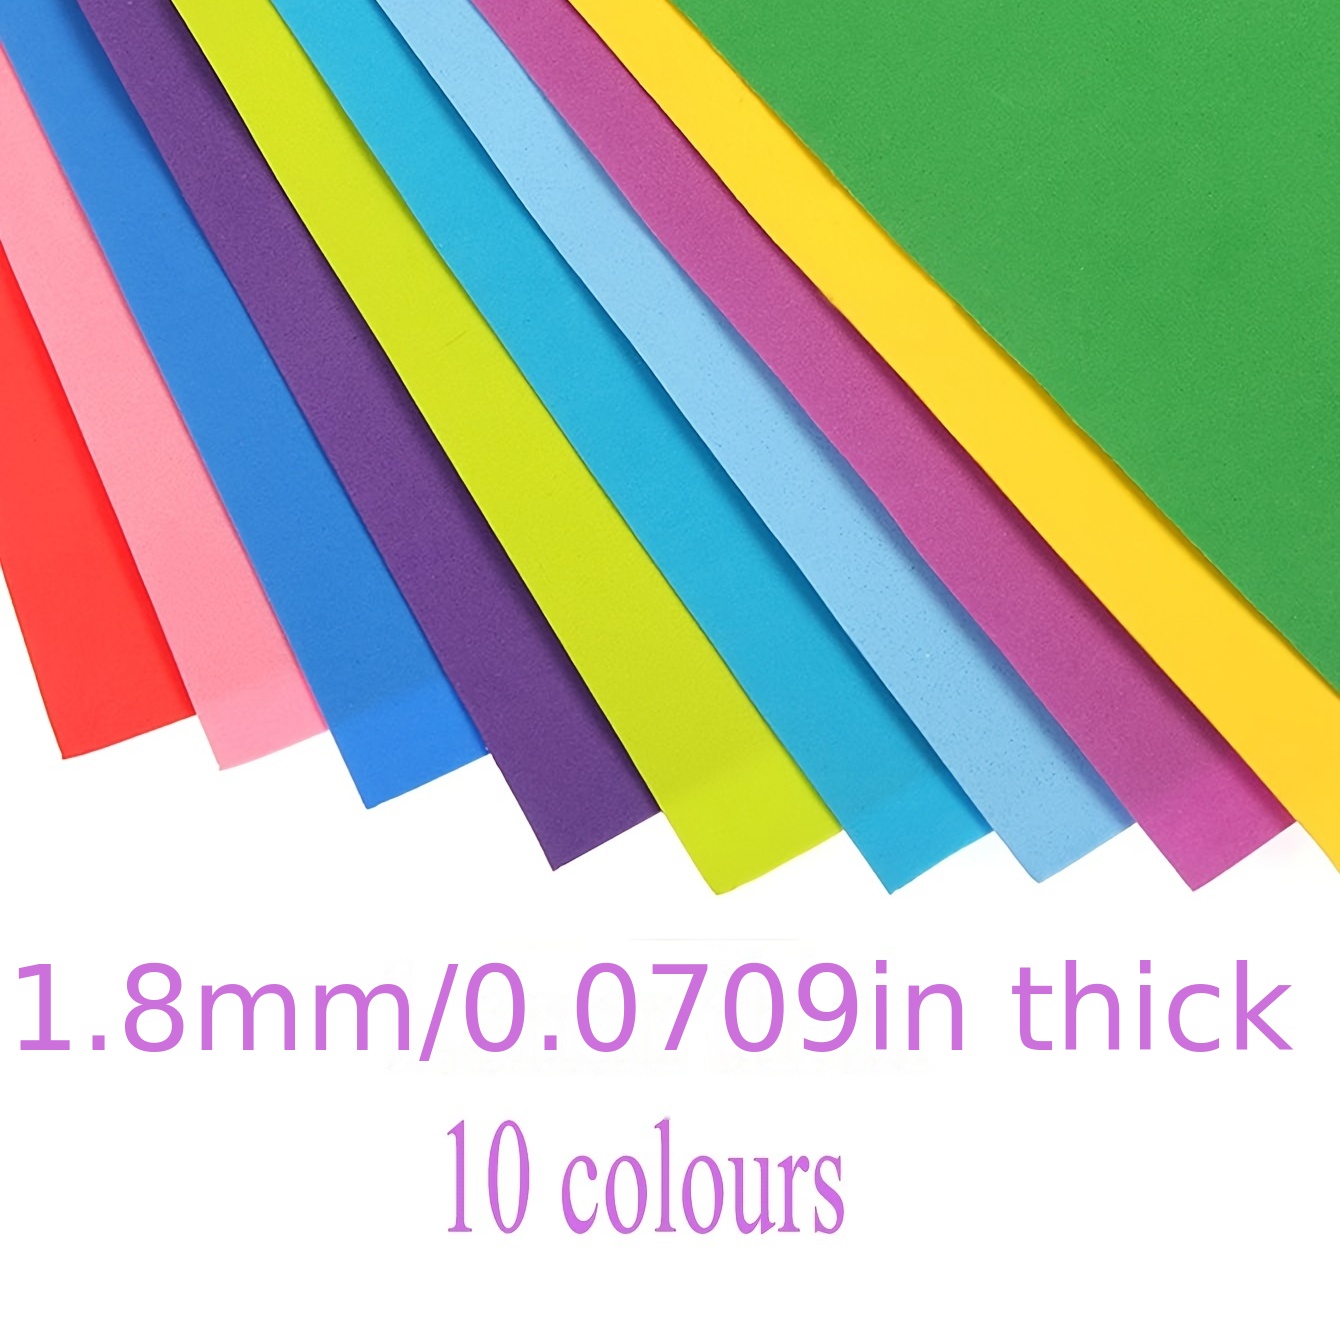 100 Sheets Of Colored A4 Paper, DIY Craft Folding, Used For Color Printing  Paper, DIY Art, Crafts & Paper Cutting (10 Colors)